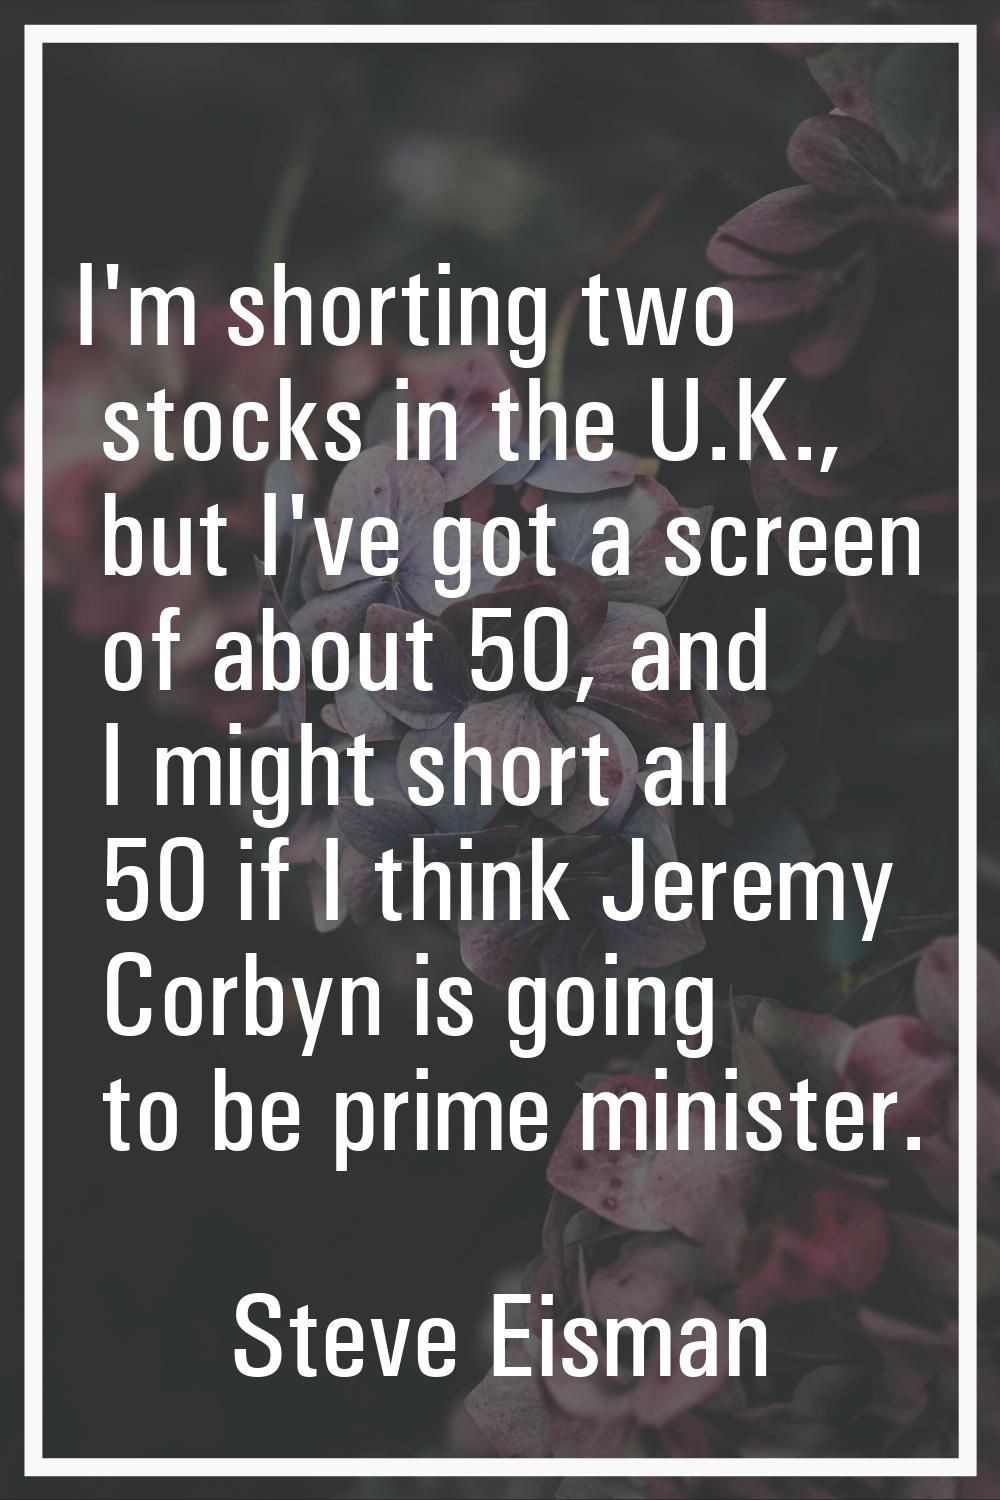 I'm shorting two stocks in the U.K., but I've got a screen of about 50, and I might short all 50 if